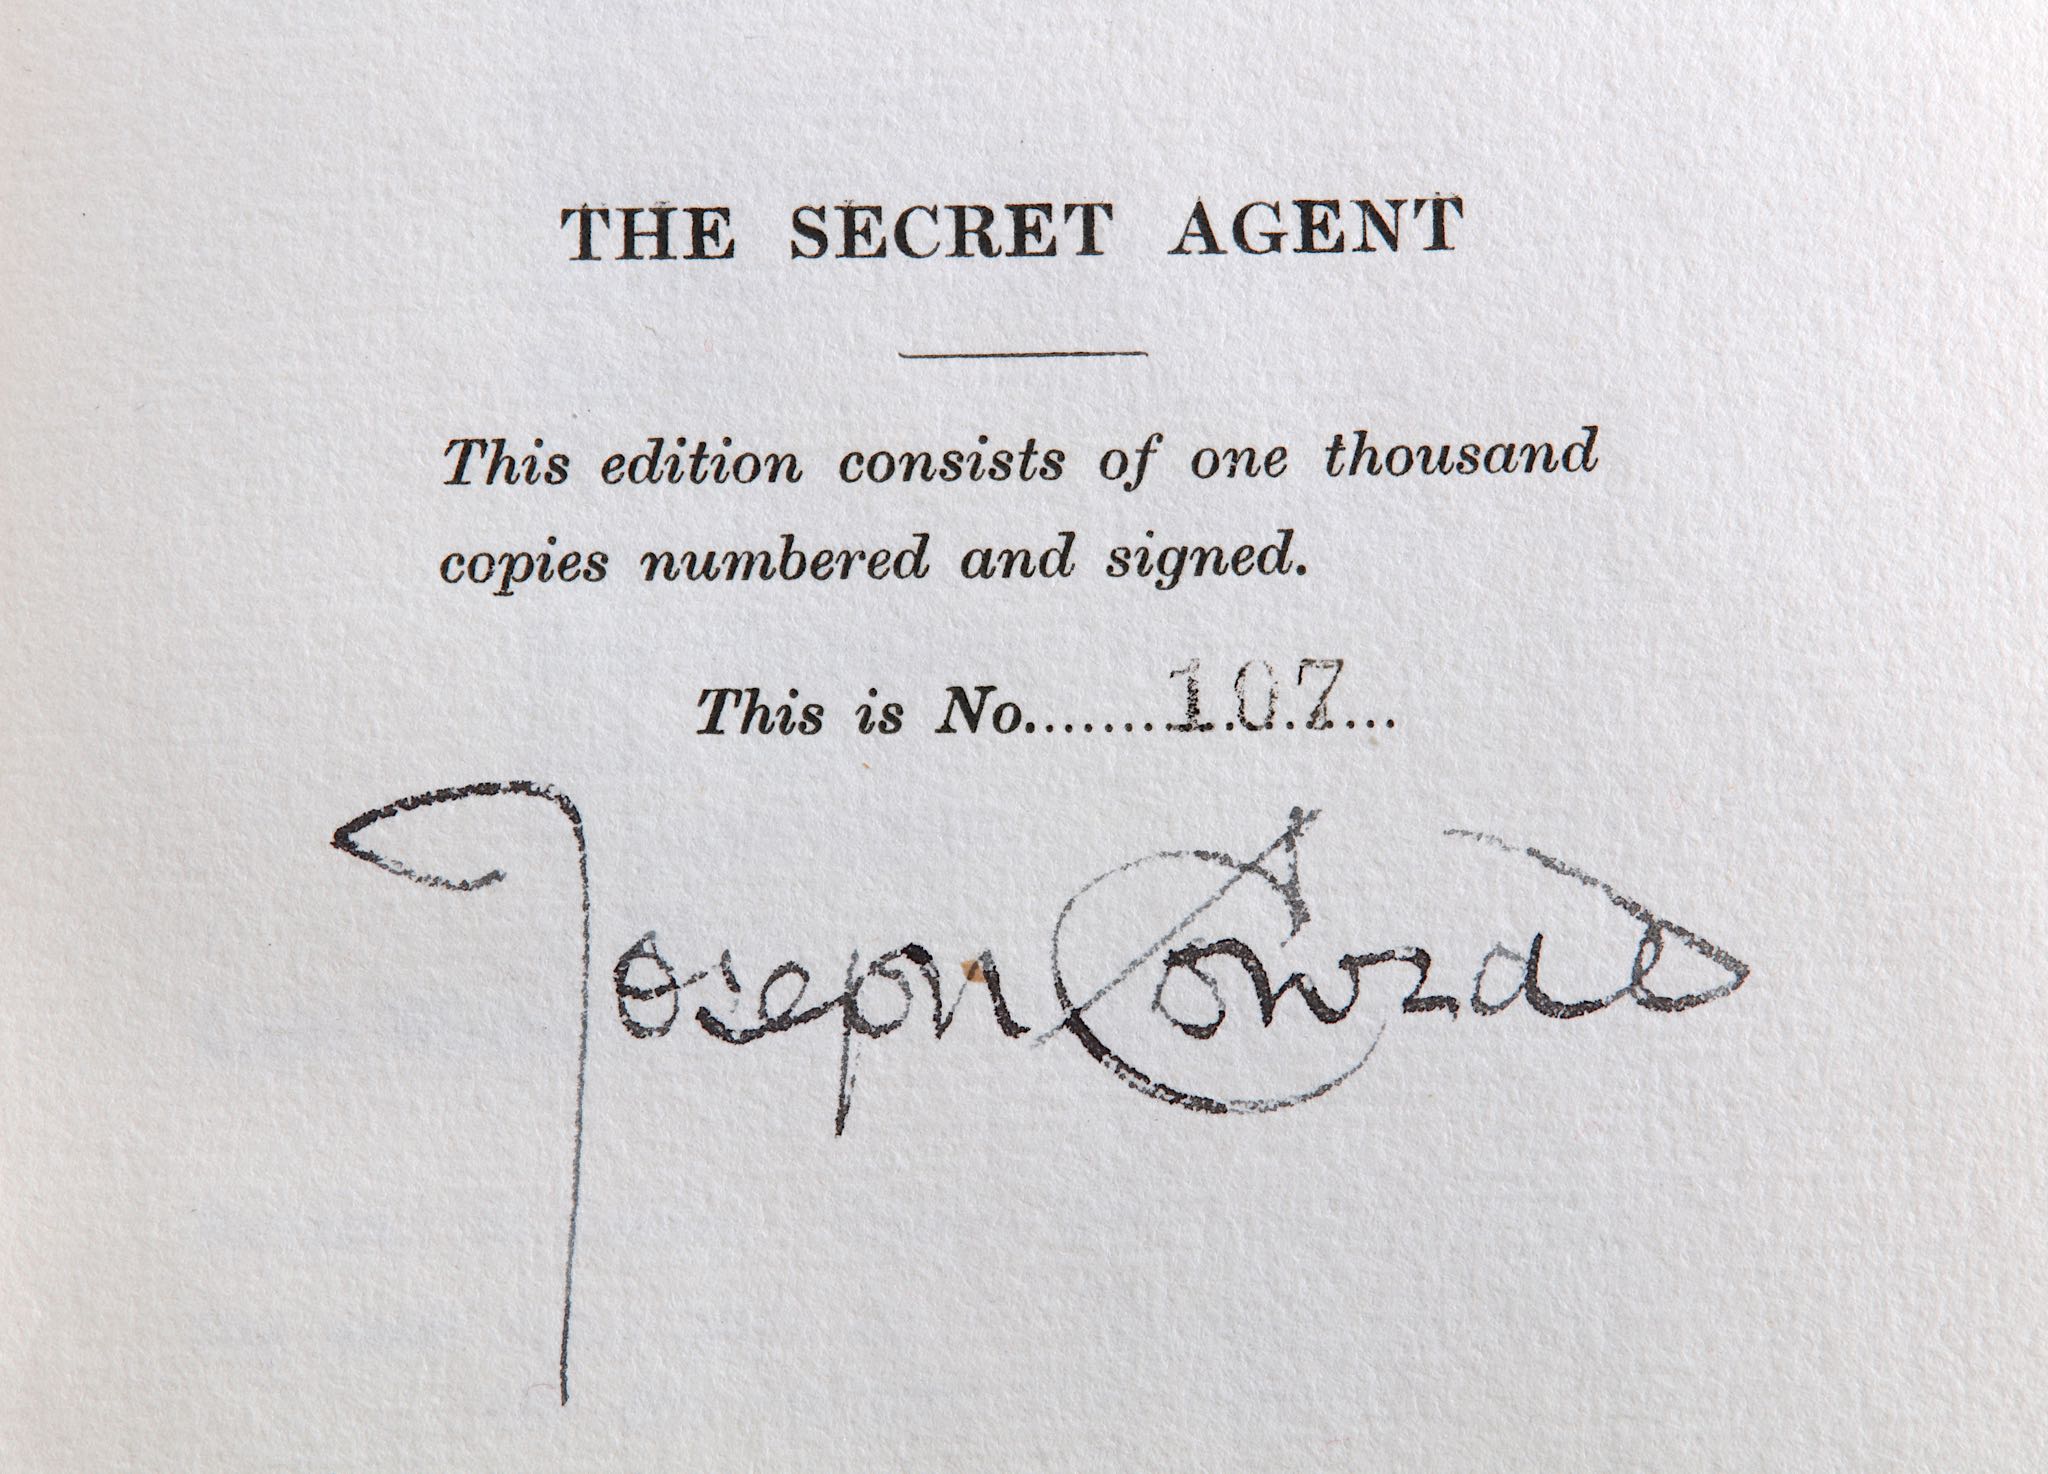 Conrad (Joseph) The Secret Agent. A Drama in Three Acts, FIRST EDITION, NUMBER 107 OF 1000 COPIES,